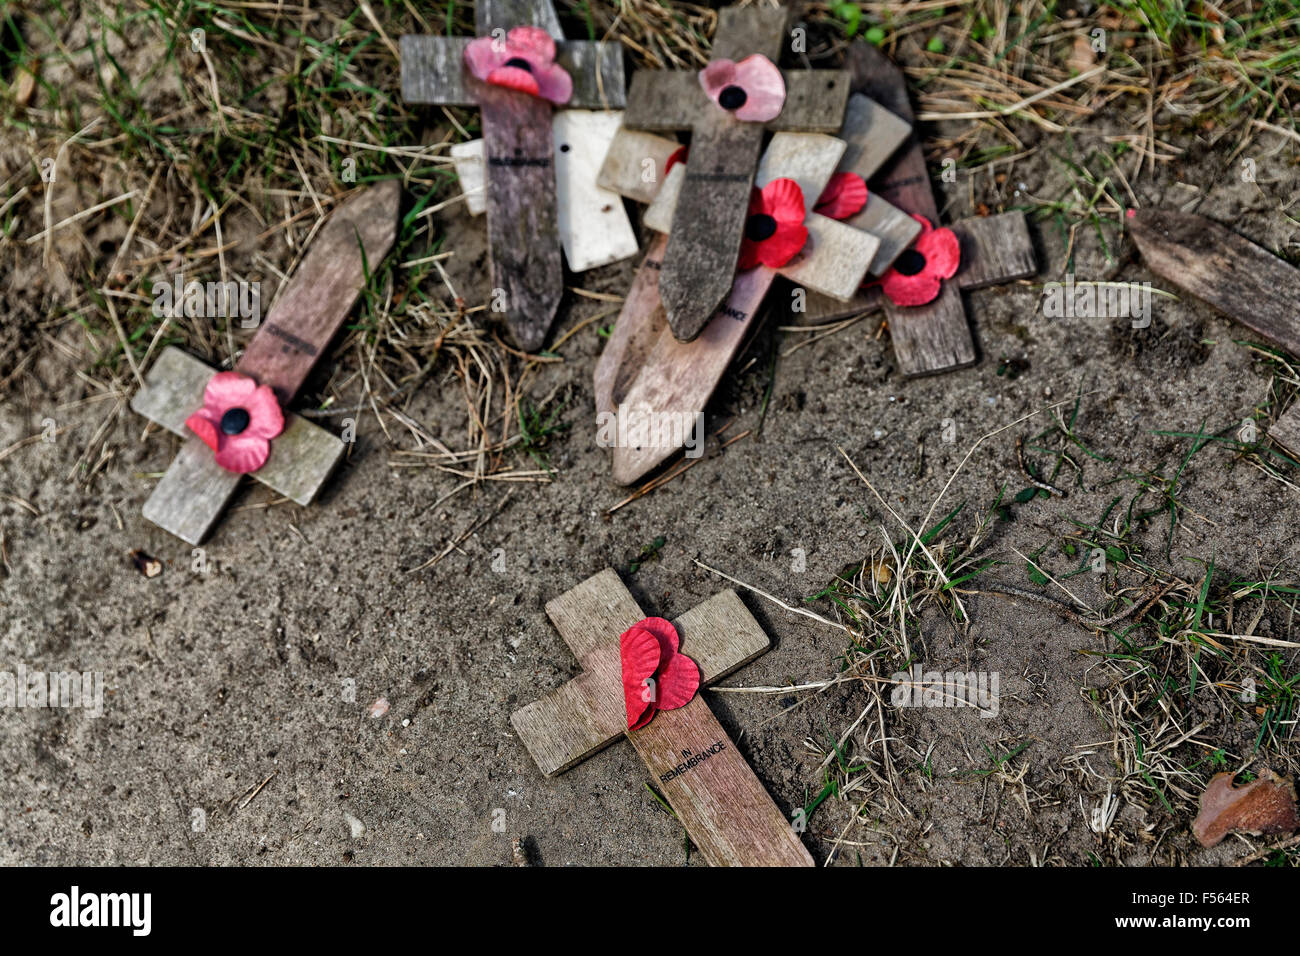 14.04.2015, Oranienburg, Brandenburg, Germany - Memorial on the site of the former Nazi concentration camp Sachsenhausen in Oranienburg near Berlin district of the same name. Pictured remembrance crosses for British prisoners of war who came in Sachsenhausen killed. EJH150414D241CAROEX.JPG - NOT for SALE in G E R M A N Y, A U S T R I A, S W I T Z E R L A N D [MODEL RELEASE: NOT APPLICABLE, PROPERTY RELEASE: NO (c) caro photo agency / Heinrich, http://www.caro-images.pl, info@carofoto.pl - In case of using the picture for non-journalistic purposes, please contact the agency - the picture is sub Stock Photo